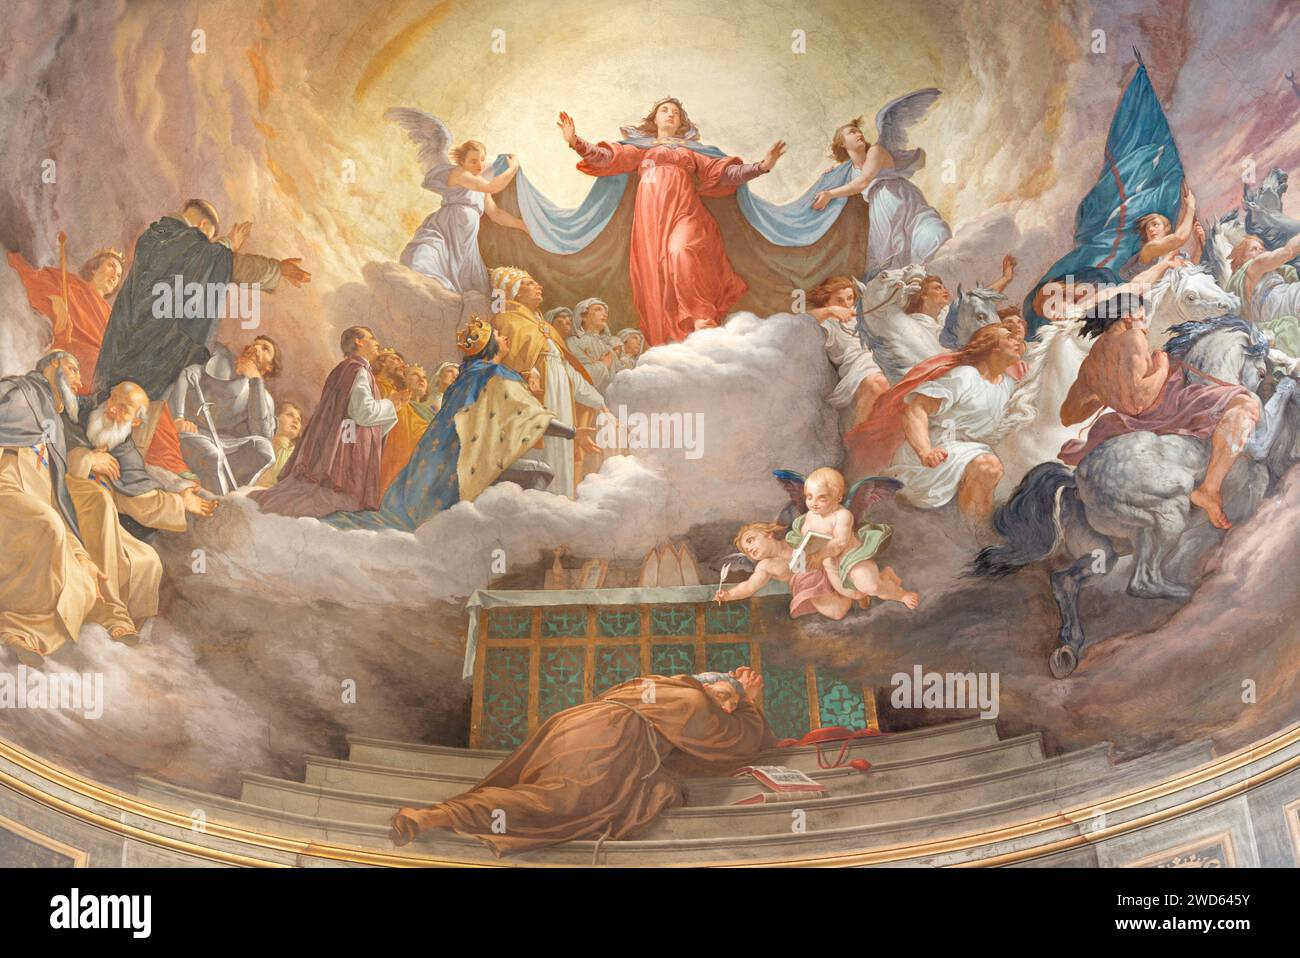 ROME, ITALY - AUGUST 27, 2021: The fresco of Assumption of Our Lady in the Vision of St Bonaventure in the church Chiesa di Santa Lucia del Gonfalone Stock Photo